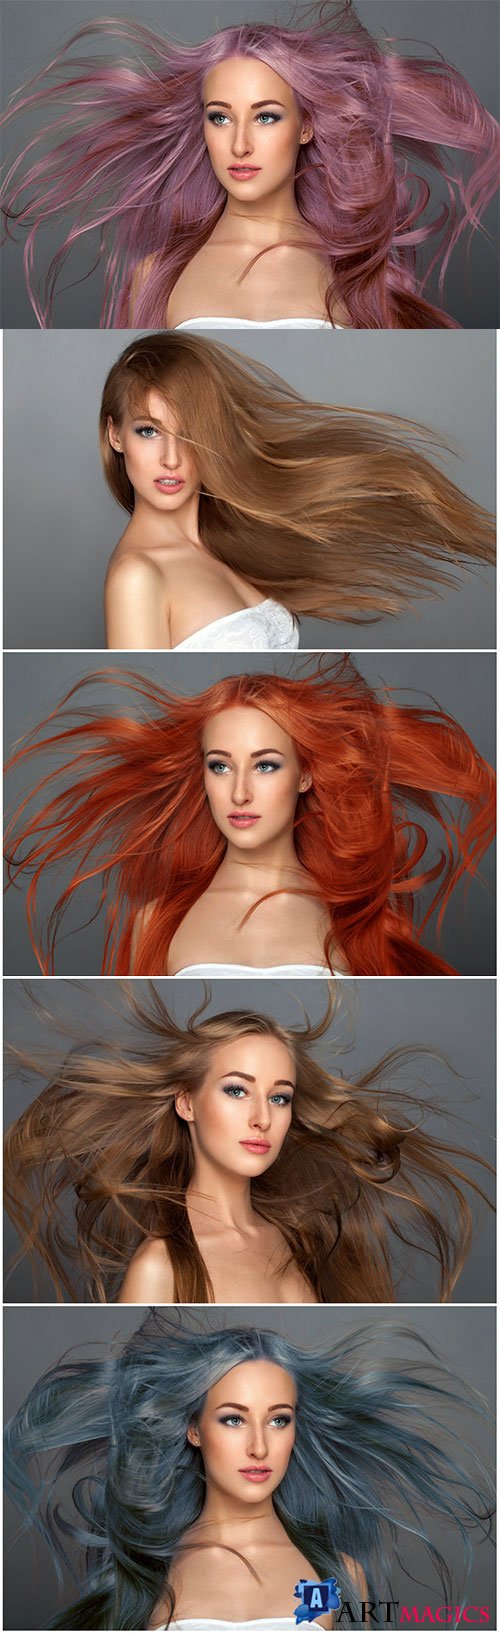 Girls with long hair of different color stock photo